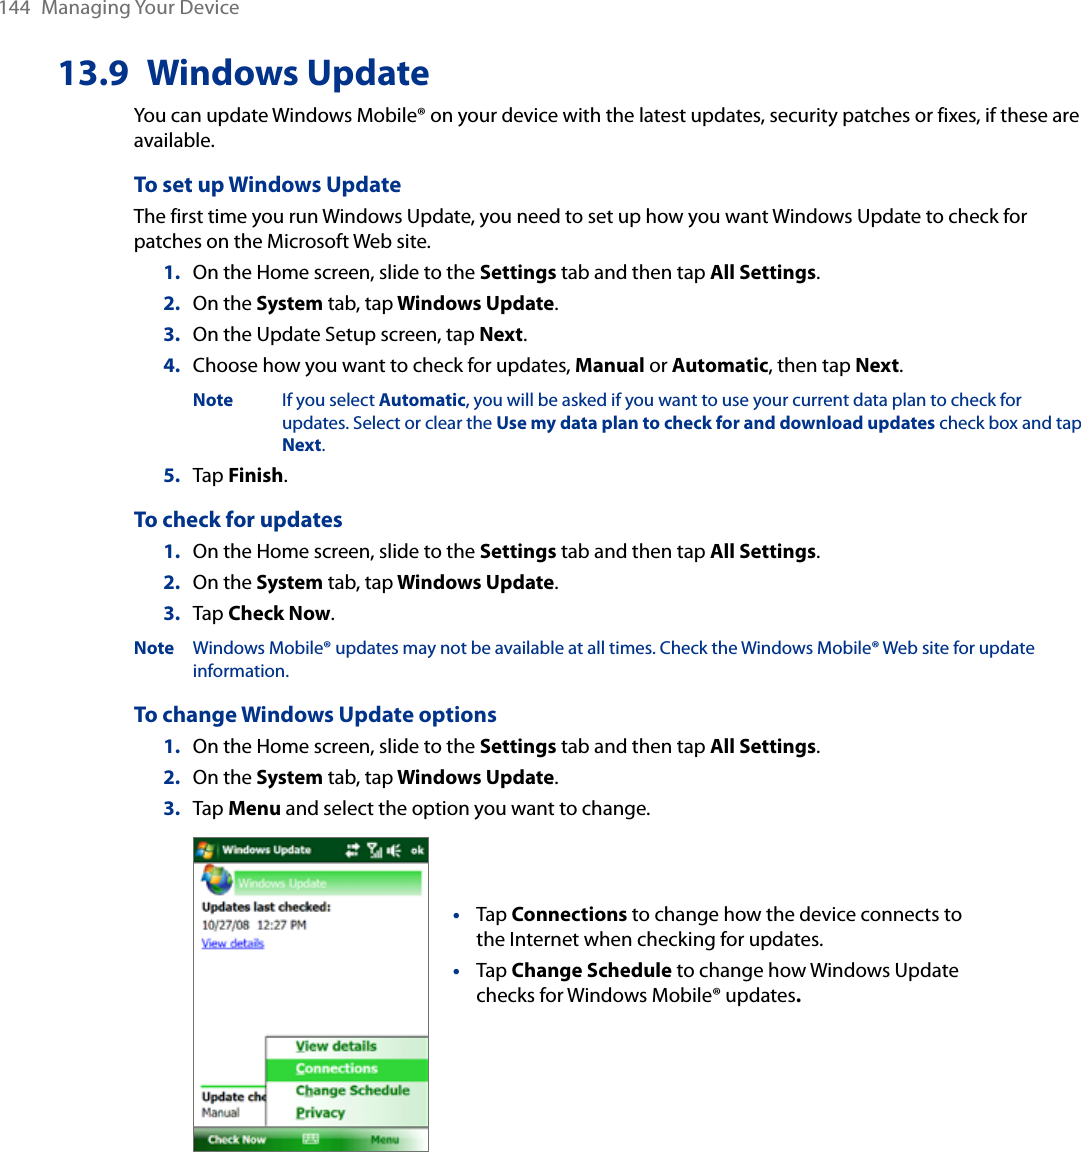 144  Managing Your Device13.9  Windows UpdateYou can update Windows Mobile® on your device with the latest updates, security patches or fixes, if these are available.To set up Windows UpdateThe first time you run Windows Update, you need to set up how you want Windows Update to check for patches on the Microsoft Web site.1.  On the Home screen, slide to the Settings tab and then tap All Settings. 2.  On the System tab, tap Windows Update.3.  On the Update Setup screen, tap Next.4.  Choose how you want to check for updates, Manual or Automatic, then tap Next.   Note  If you select Automatic, you will be asked if you want to use your current data plan to check for       updates. Select or clear the Use my data plan to check for and download updates check box and tap      Next.5.  Tap Finish.To check for updates1.  On the Home screen, slide to the Settings tab and then tap All Settings. 2.  On the System tab, tap Windows Update.3.  Tap Check Now.Note  Windows Mobile® updates may not be available at all times. Check the Windows Mobile® Web site for update information.To change Windows Update options1.  On the Home screen, slide to the Settings tab and then tap All Settings. 2.  On the System tab, tap Windows Update.3.  Tap Menu and select the option you want to change. Tap Connections to change how the device connects to the Internet when checking for updates.Tap Change Schedule to change how Windows Update checks for Windows Mobile® updates. ••